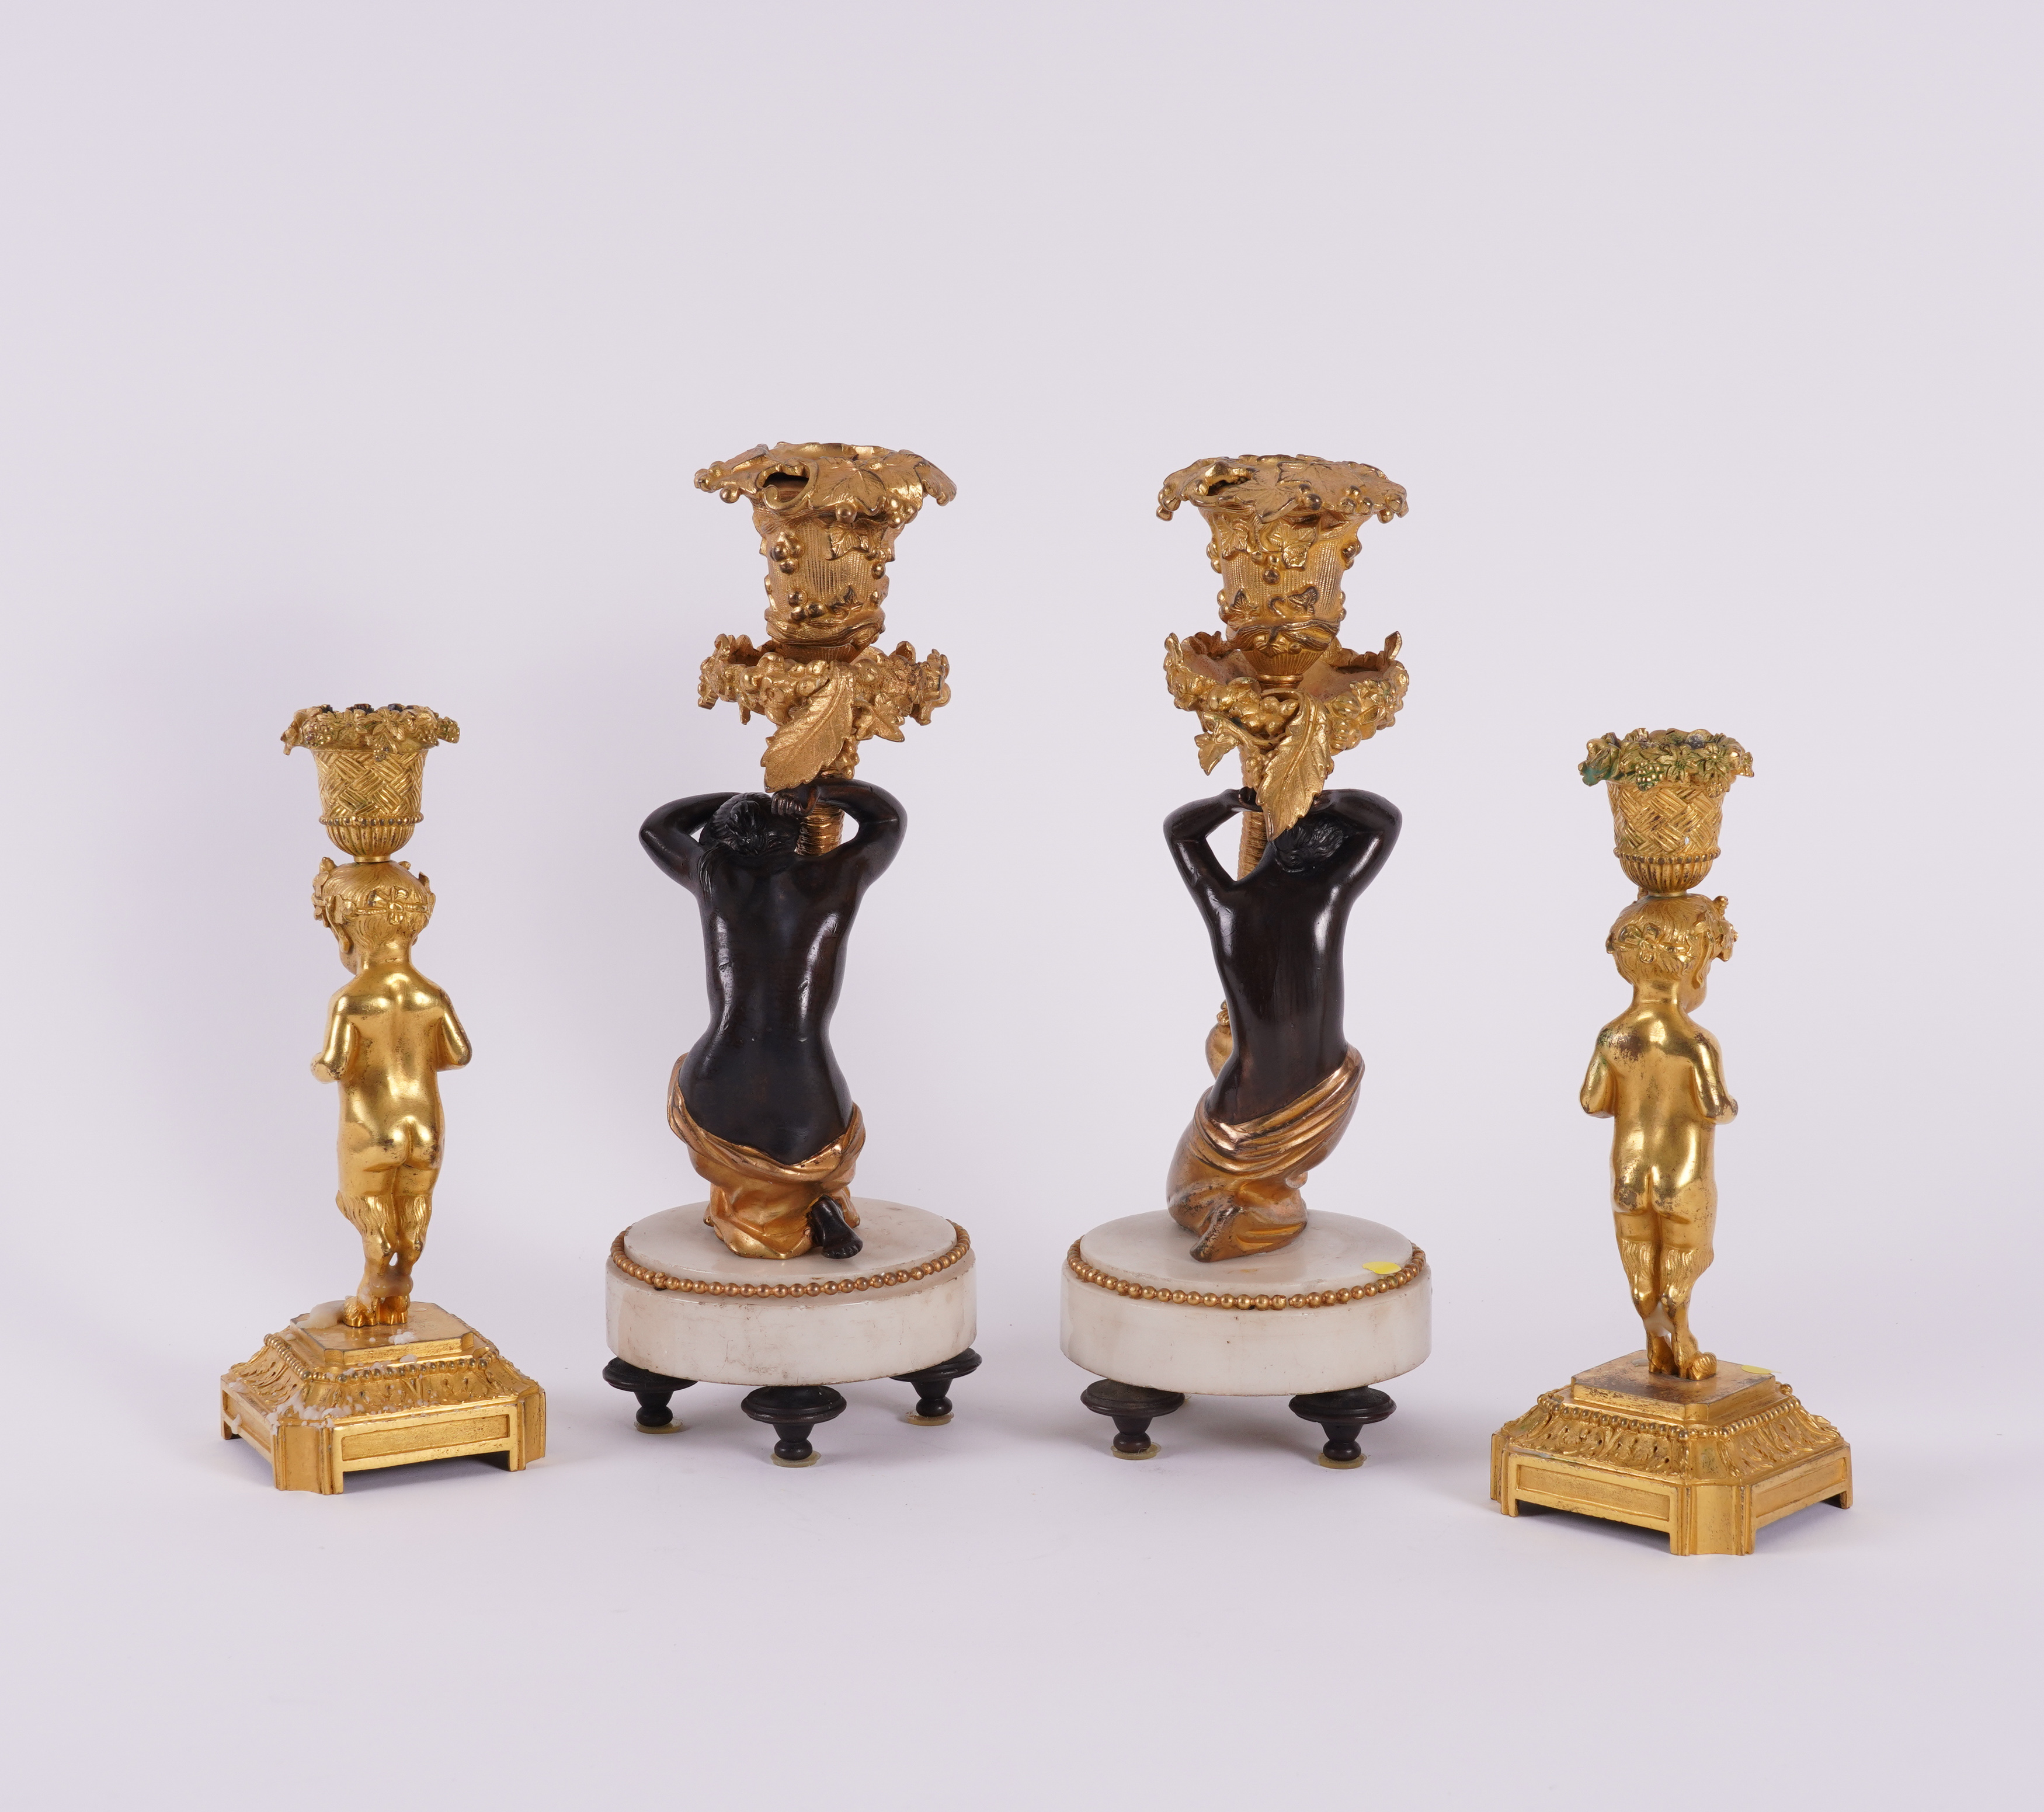 TWO PAIRS OF FRENCH LOUIS XVI STYLE GILT-BRONZE CANDLESTICKS (4) - Image 5 of 5